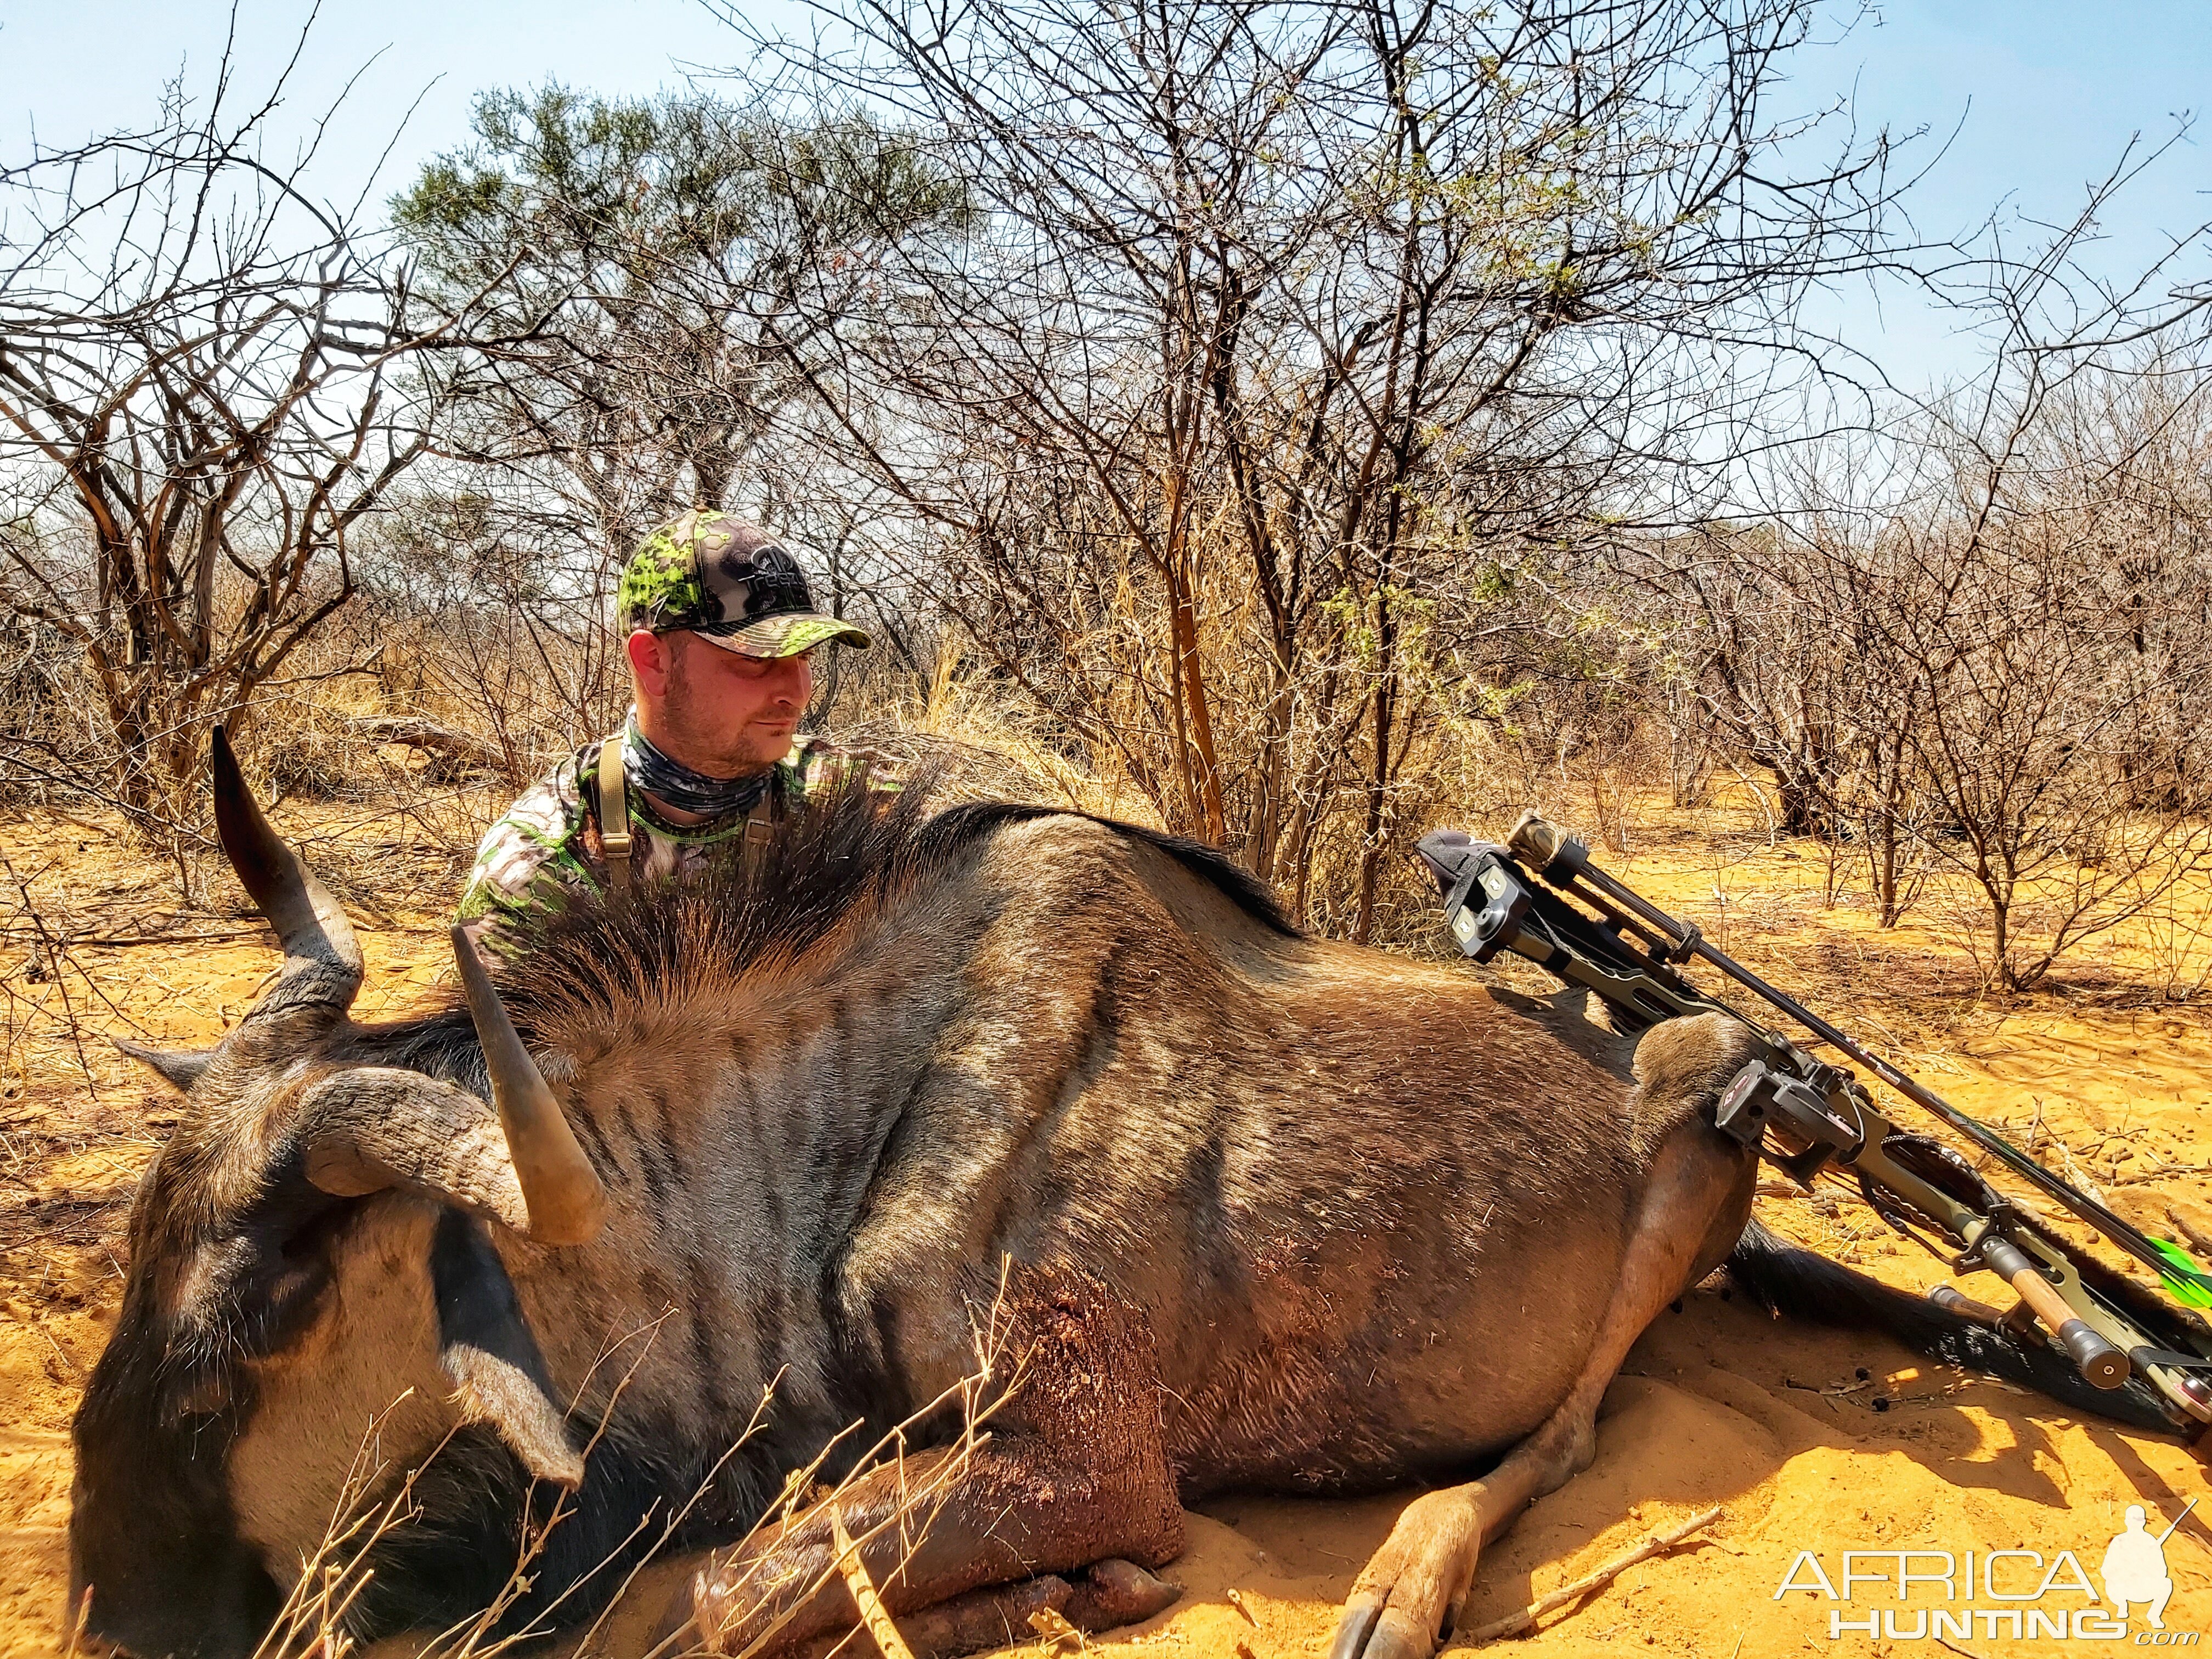 Blue Wildebeest “Connochaetes Taurinus” Bowhunting South Africa